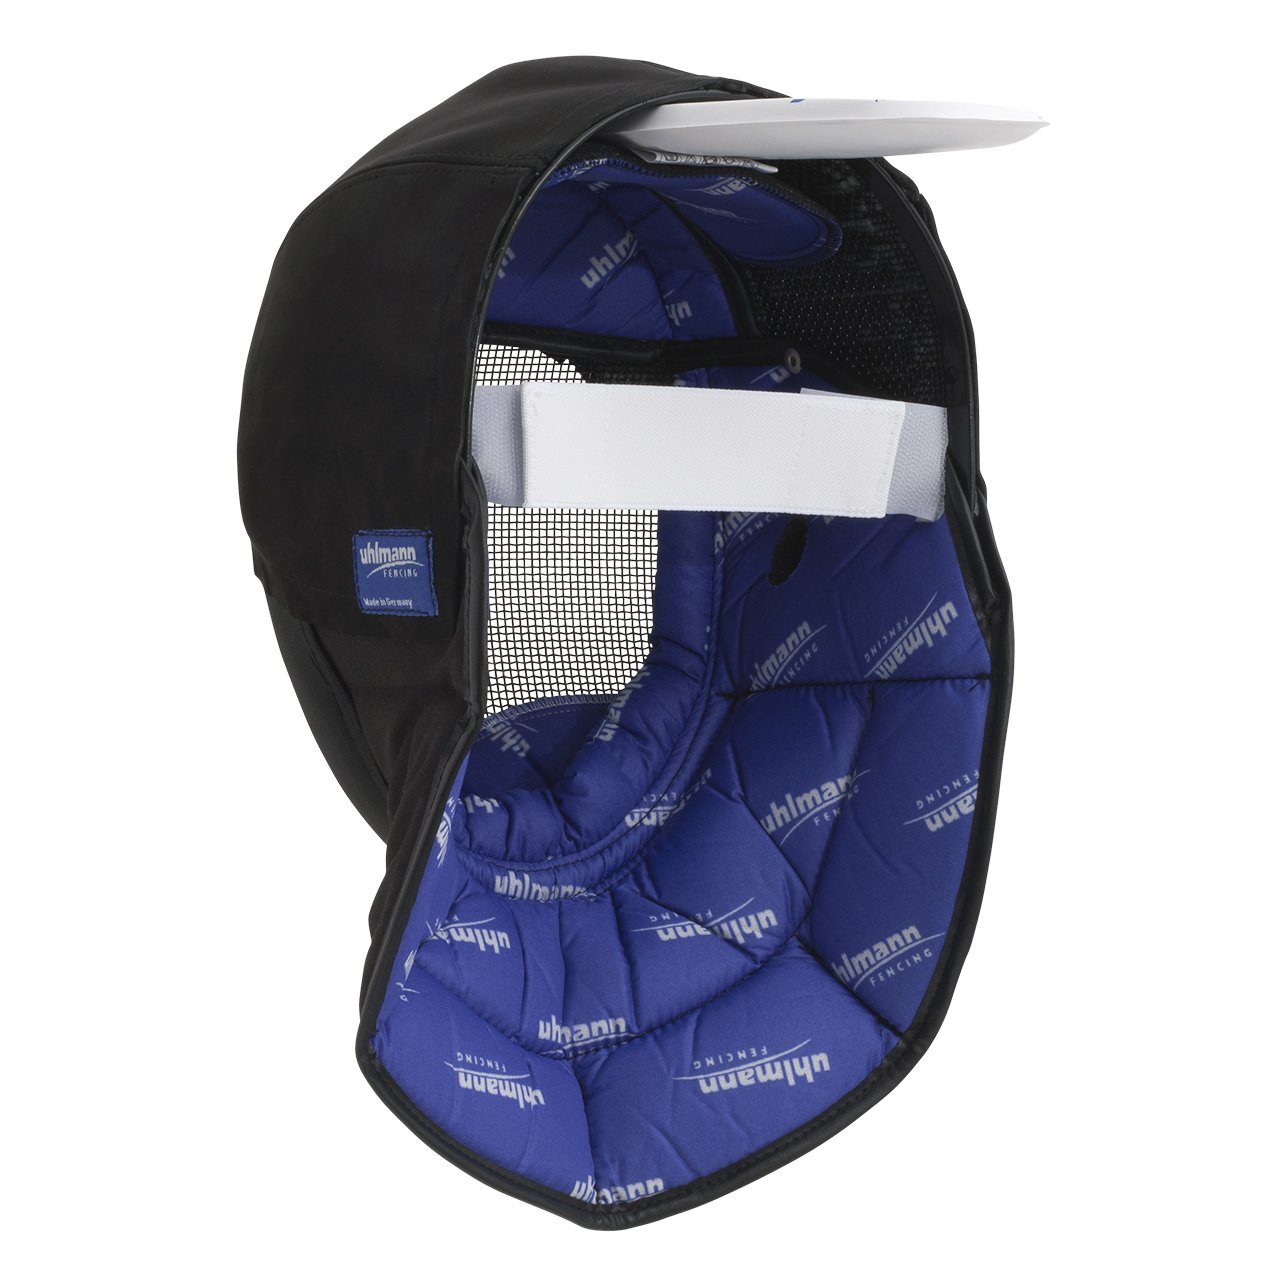 master fencing mask with leather padding 350N